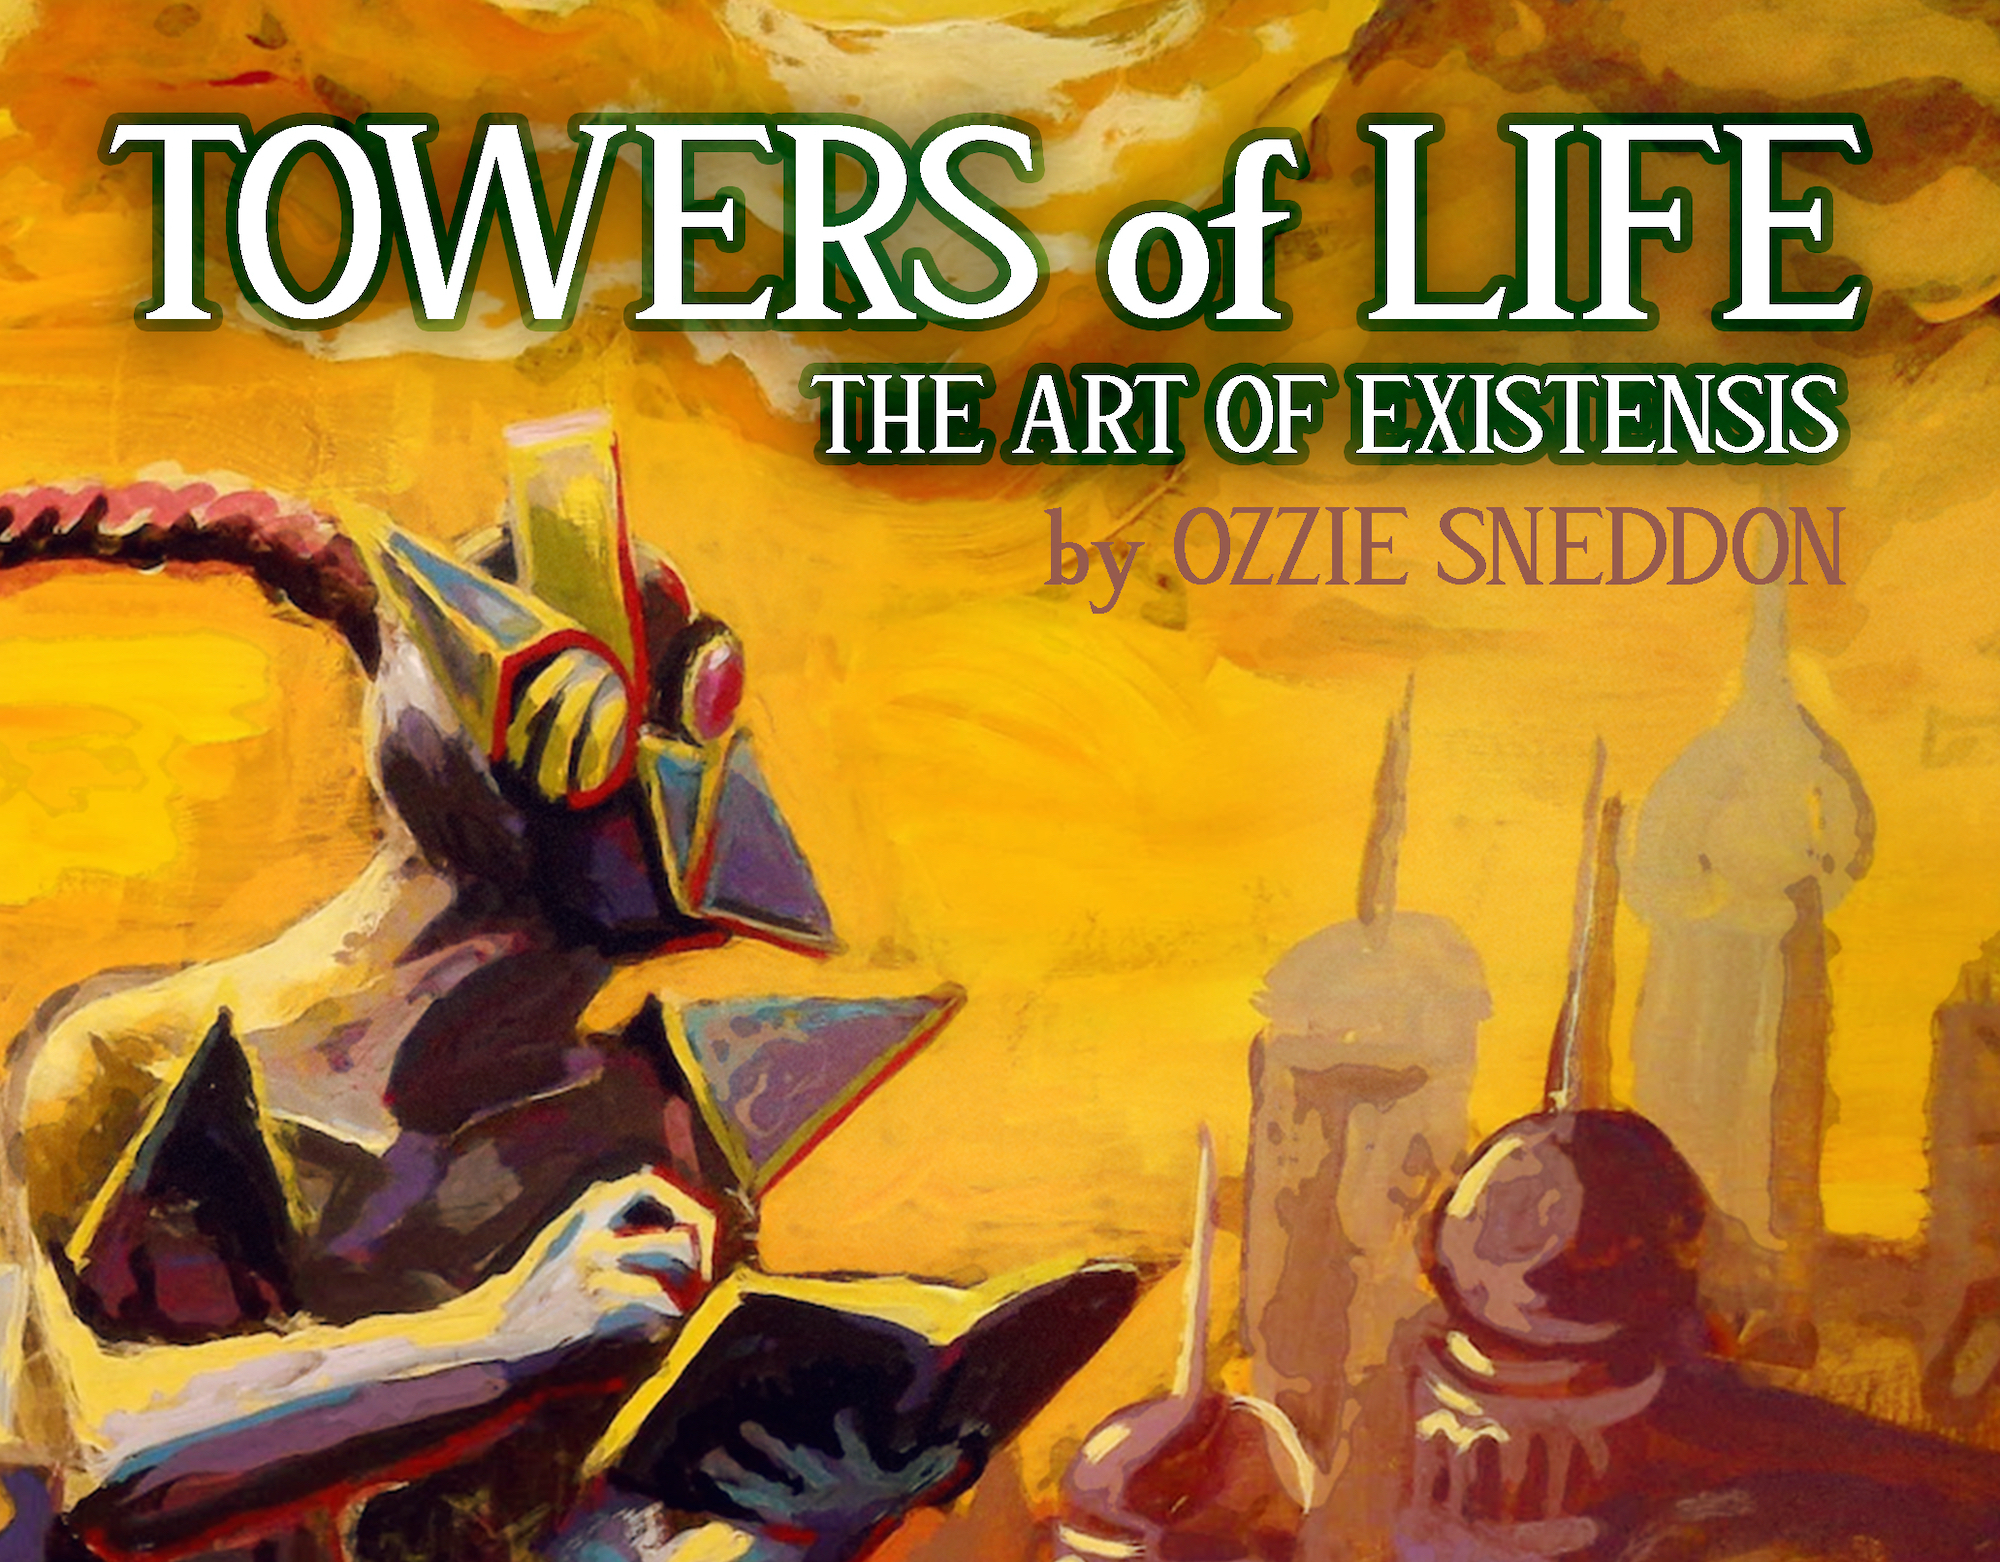 "Towers of Life" - The Art of Existensis